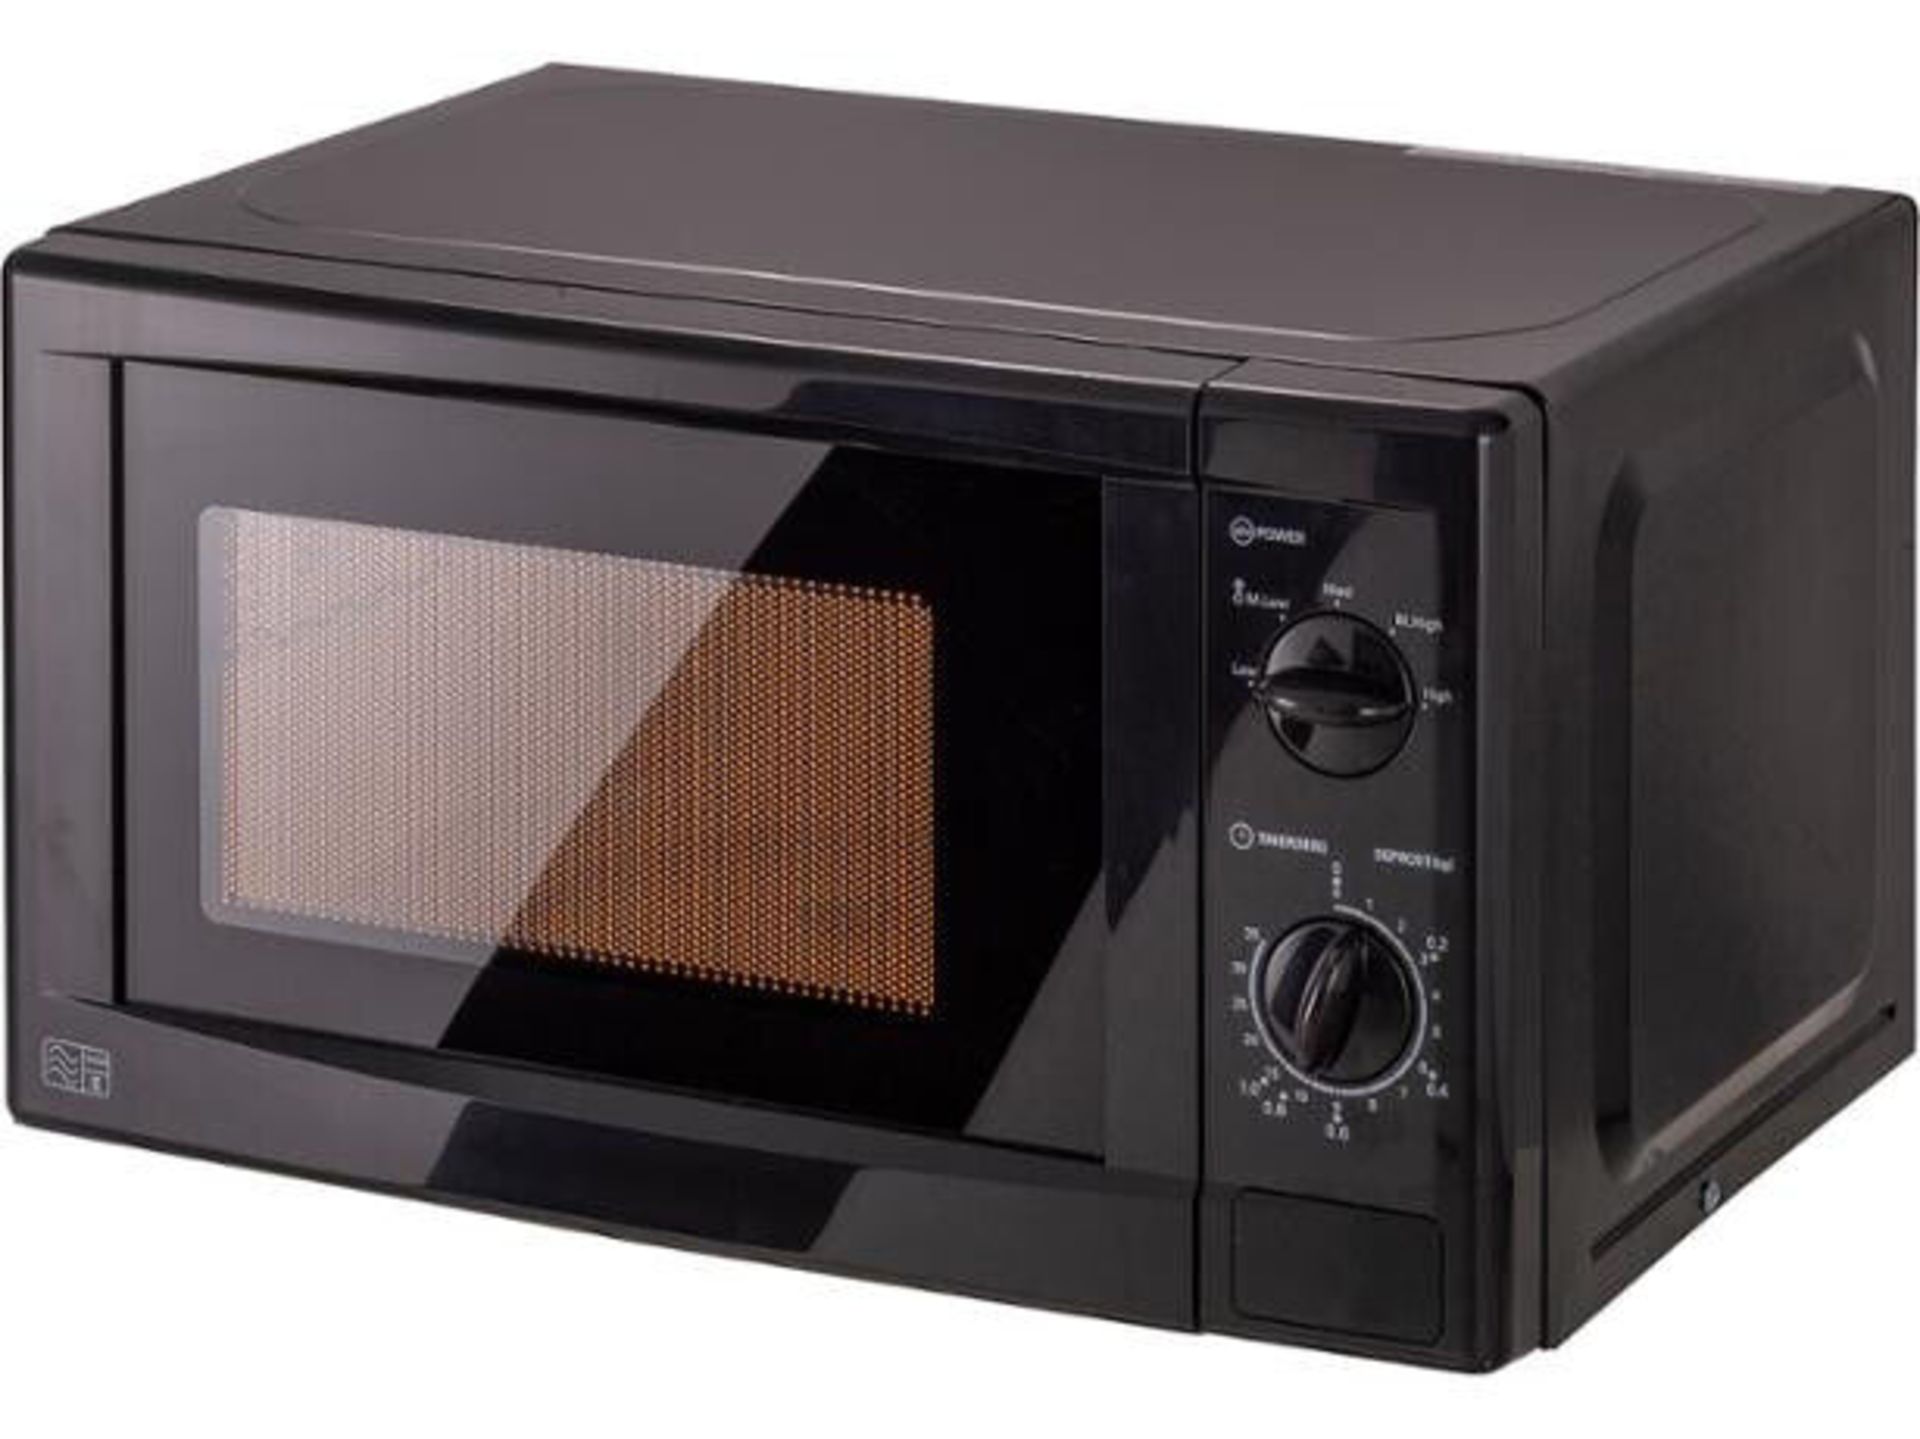 2x Microwave Oven Black 700W 17L (GMM001NB-18) RRP £60 Each. (Spares Or Repairs).